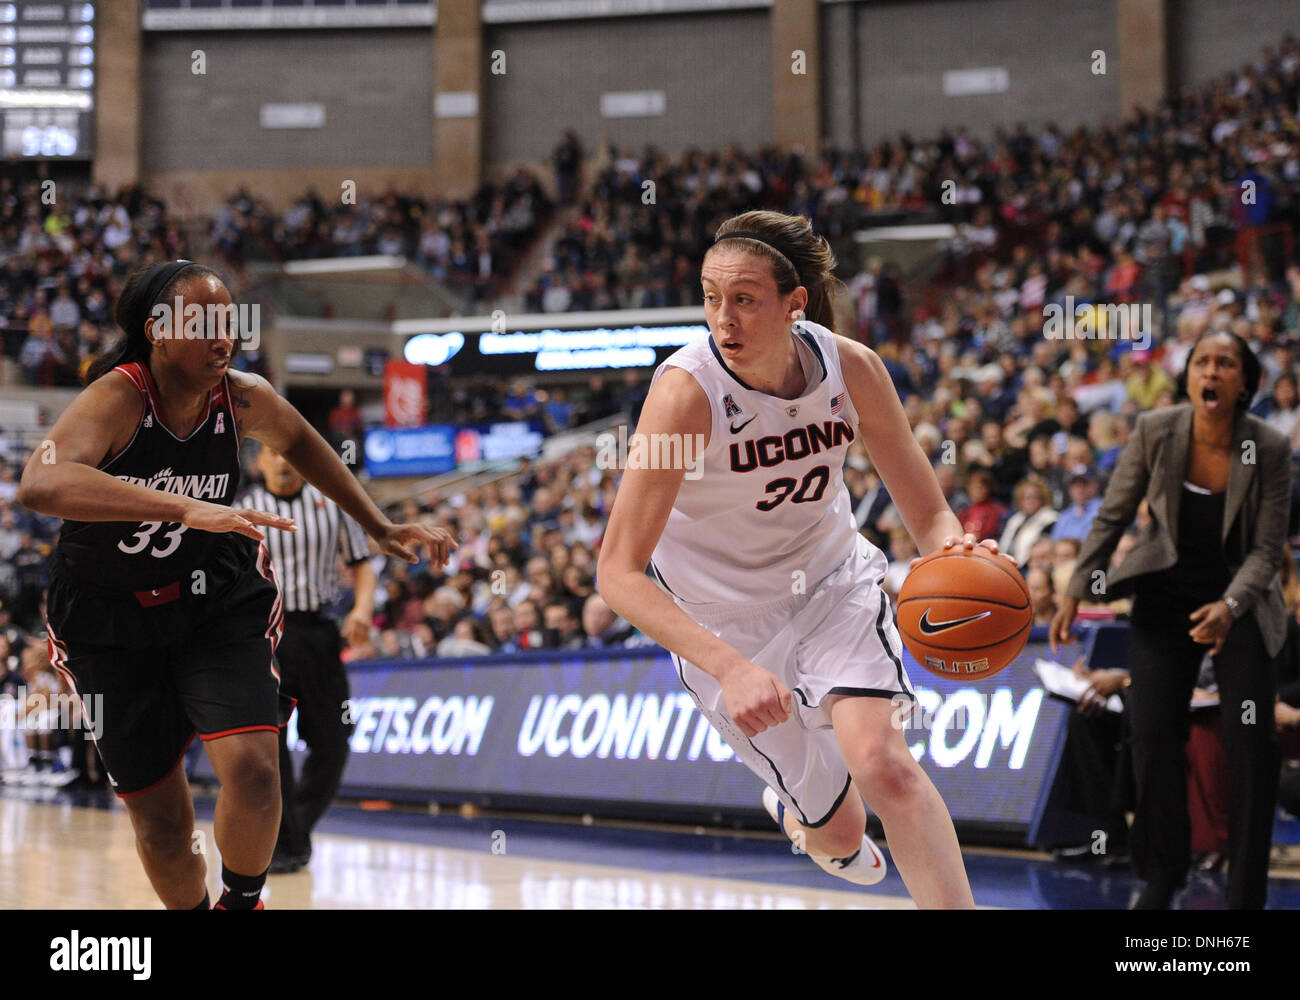 Storrs, CT, USA. 22nd Nov, 2013. Sunday December 29, 2013: UConn huskies guard-forward Breanna Stewart (30) drives to the basket against Cincinnati Bearcats forward Jeanise Randolph (33) during the 1st half of the womens NCAA basketball game between Cincinnati and Connecticut at Gampel Pavilion in Storrs, CT. Bill Shettle / Cal Sport Media. © csm/Alamy Live News Stock Photo